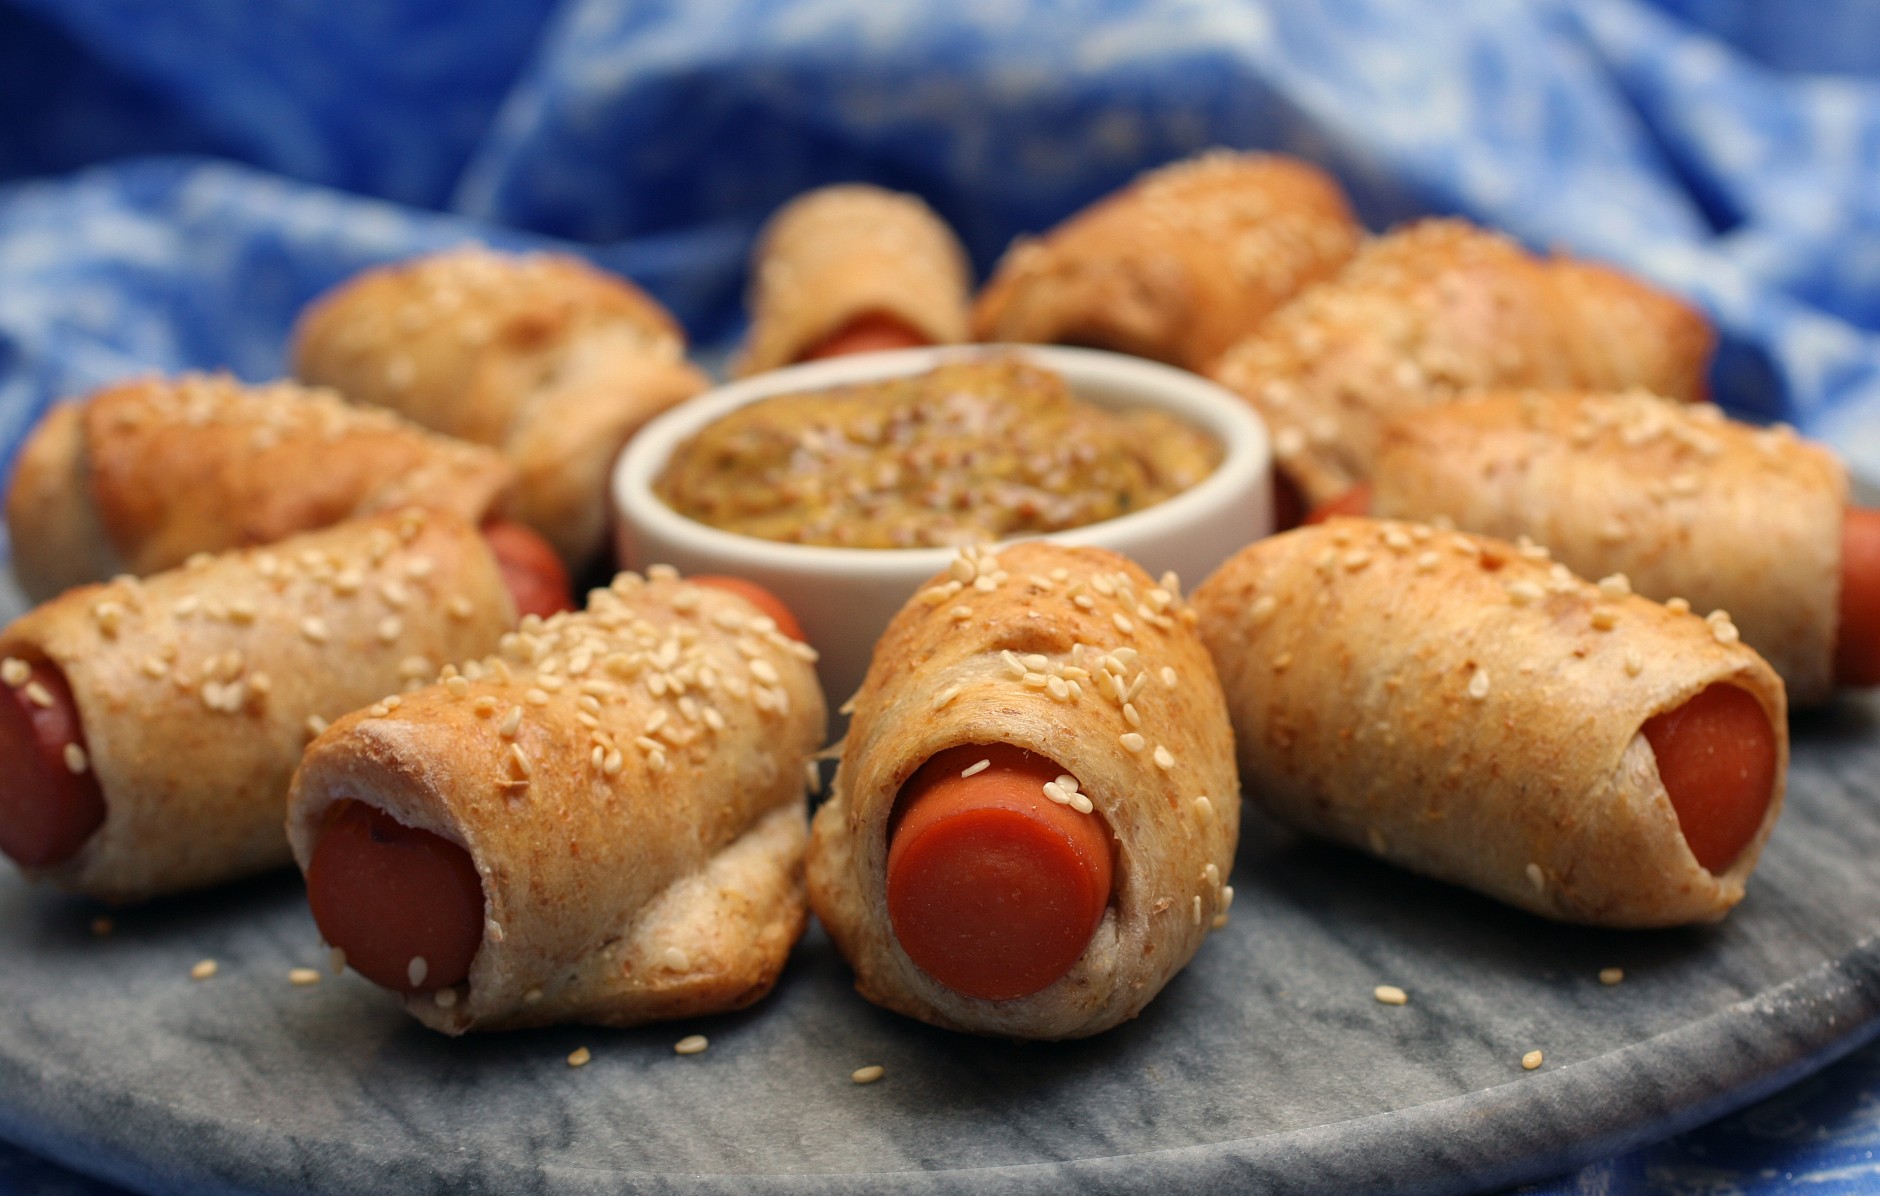 **FOR USE WITH AP LIFESTYLES**      Low-fat Pigs in a Healthy Blanket are seen in this Sunday, Oct. 19, 2008 photo. You can assure your guests that these usually high fat but always tasty finger foods have kept the flavor but reduced the fat. Whole-wheat pizza dough and nearly fat-free hot dogs keep these Low-fat Pigs in a Healthy Blanket guilt free. (AP Photo/Larry Crowe)